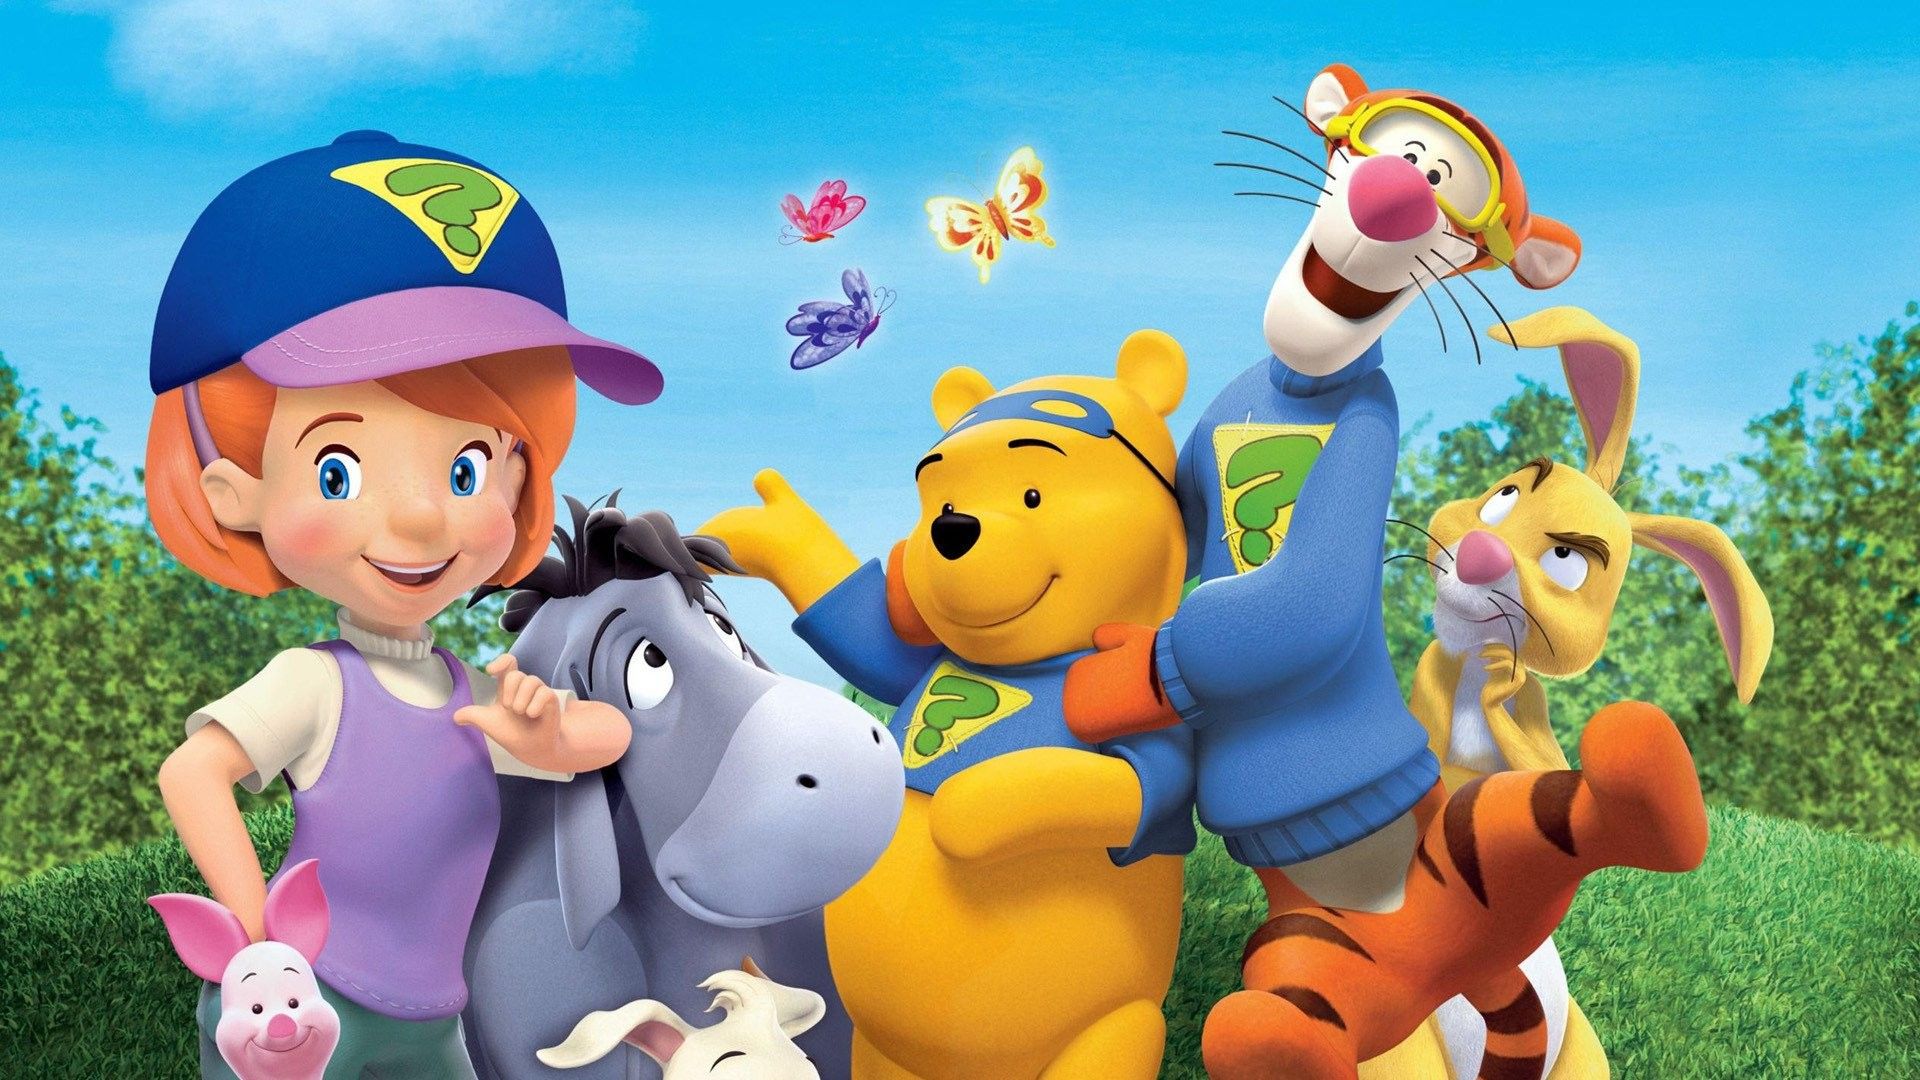 Wallpaper Of Winnie Friends Tigger And Pooh, Download